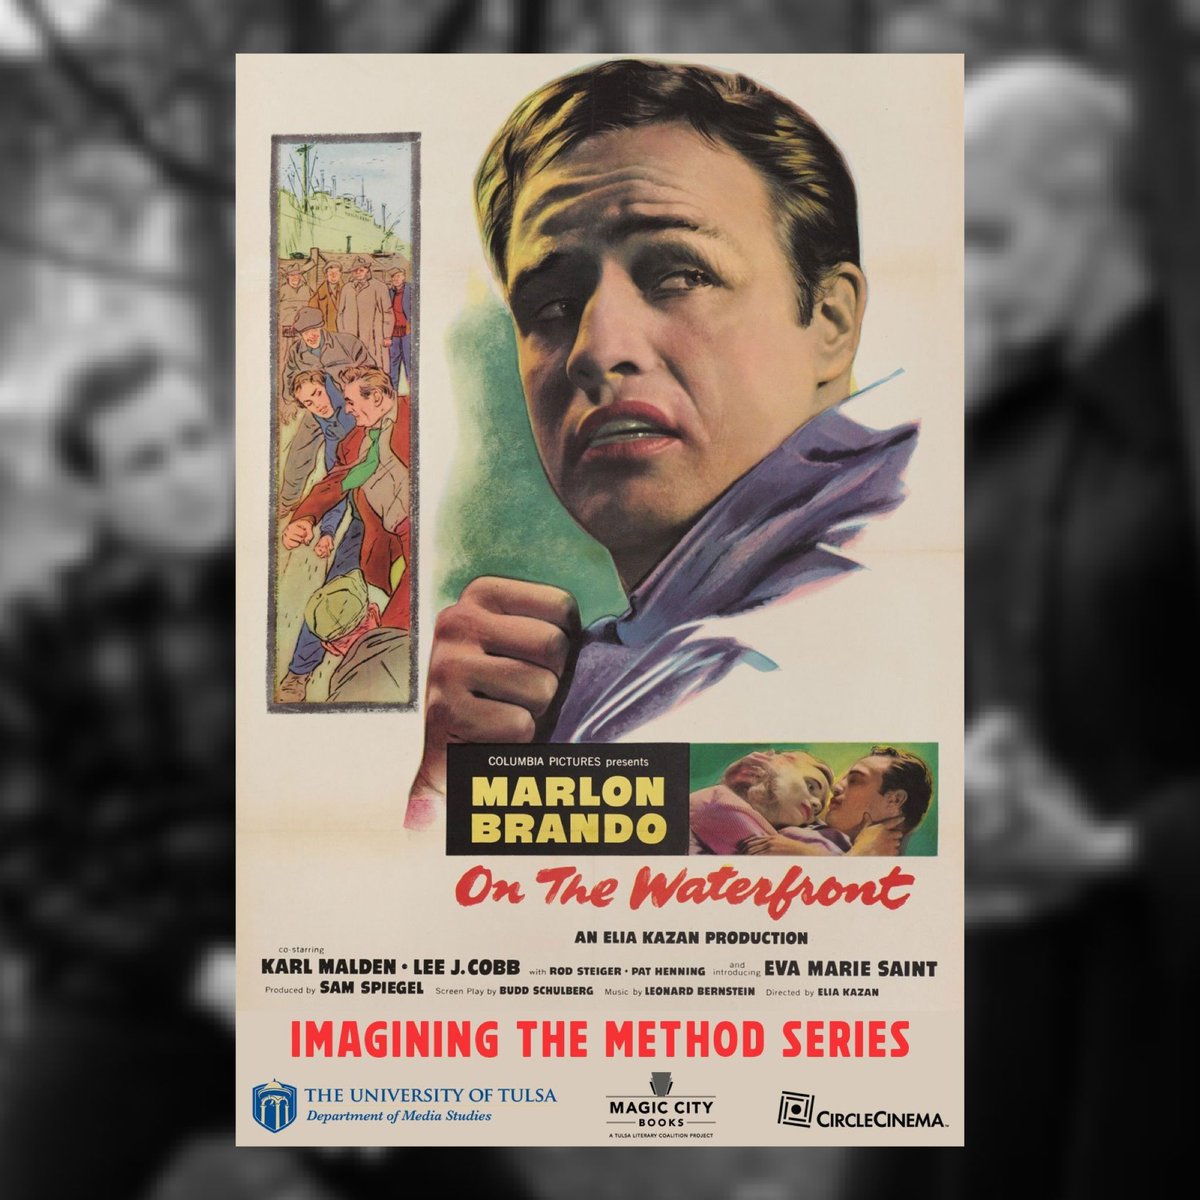 TOMORROW 4/26! 7pm. Circle Cinema. Our “Imagining the Method” series w/ @circlecinema, and @utulsa continues Friday (4/26) w/ On the Waterfront! Our guest: writer/actor Barry Friedman talks about studying w/ legendary acting coach, Uta Hagen, NY theatre, and more. Tix just $10.